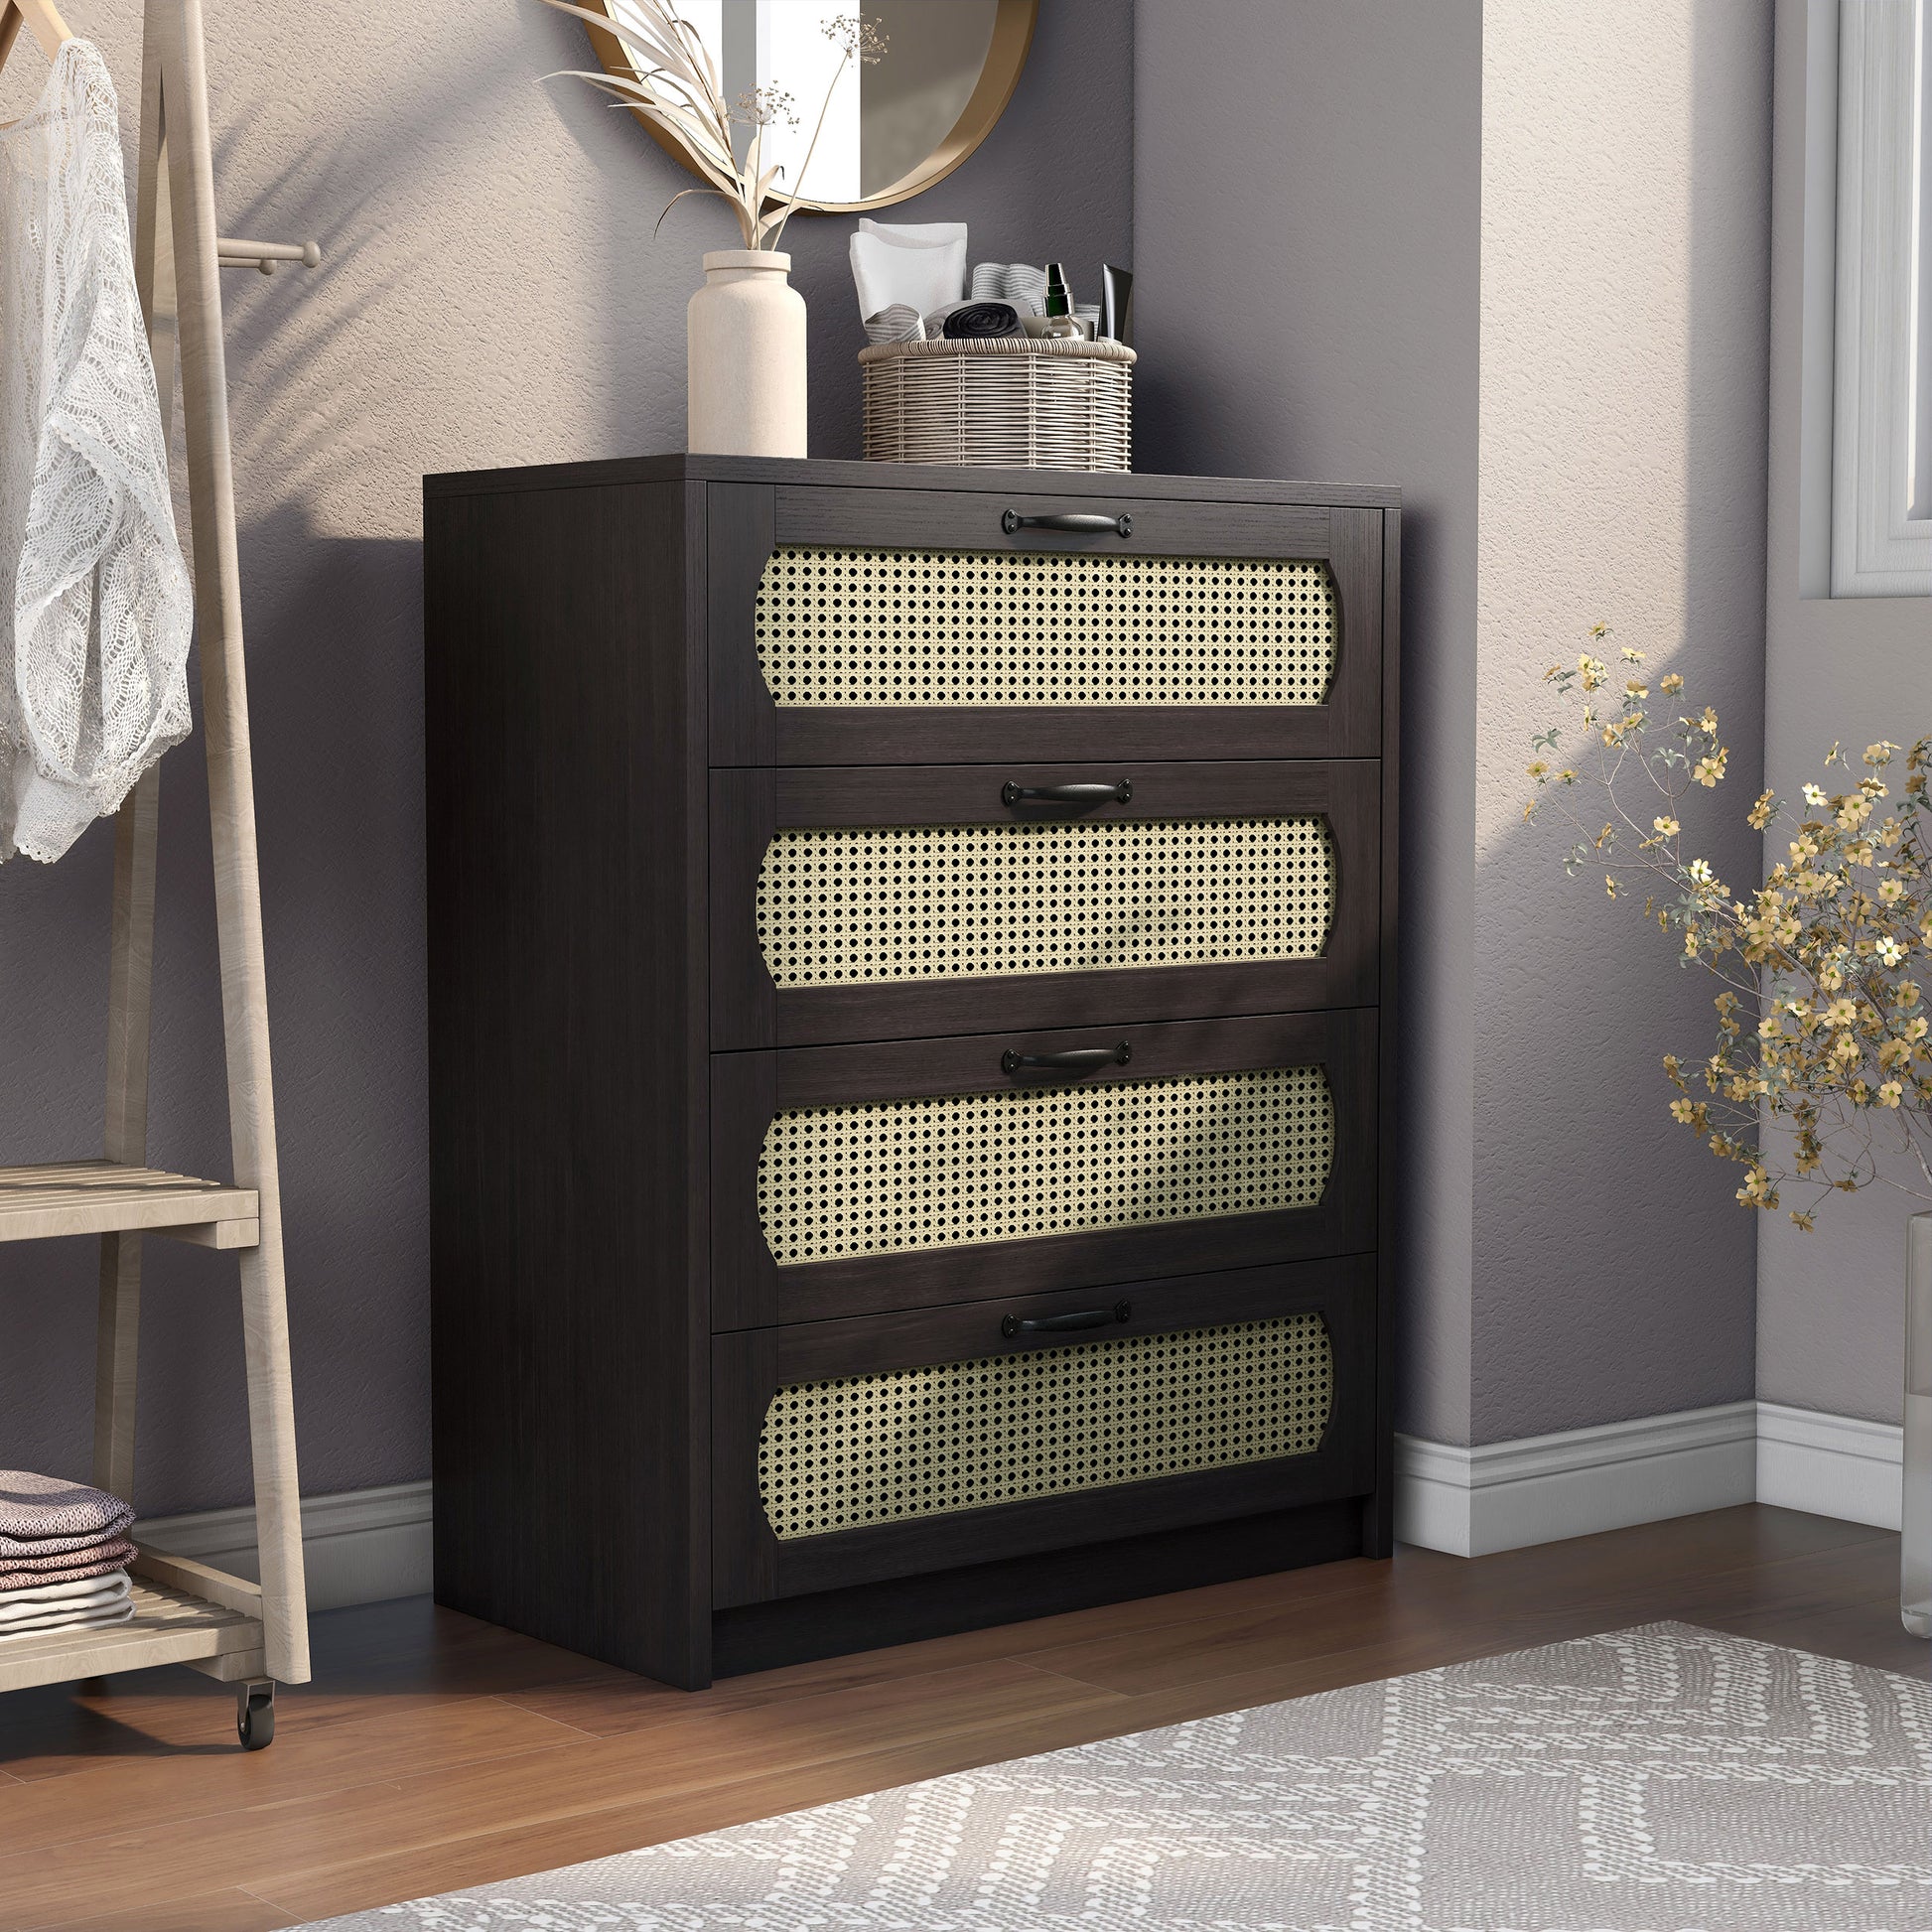 Right angled bohemian espresso and rattan four-drawer mini chest cabinet in a bedroom with accessories